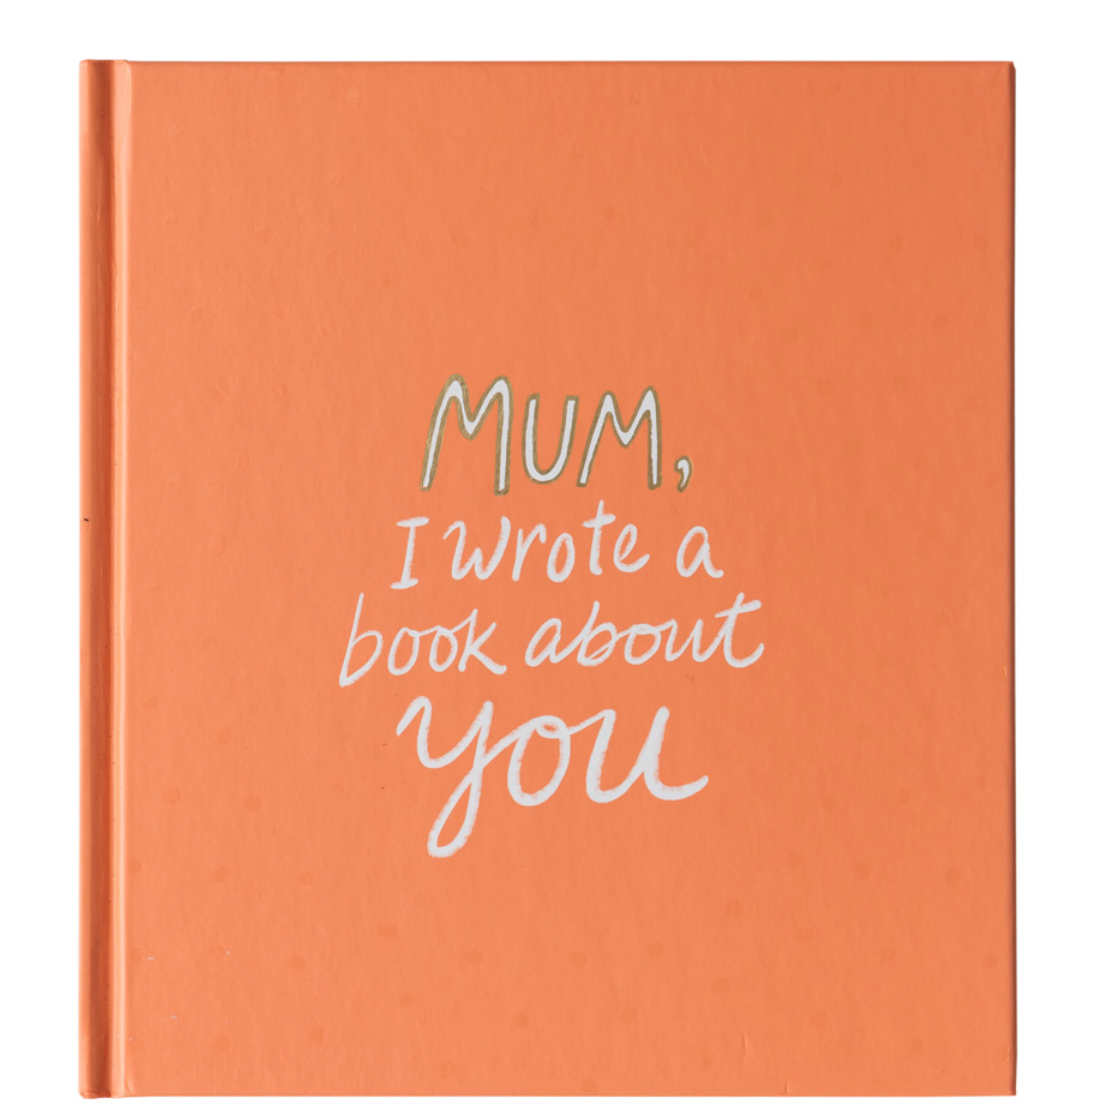 MUM, I WROTE A BOOK ABOUT YOU - Daisy Grace Lifestyle